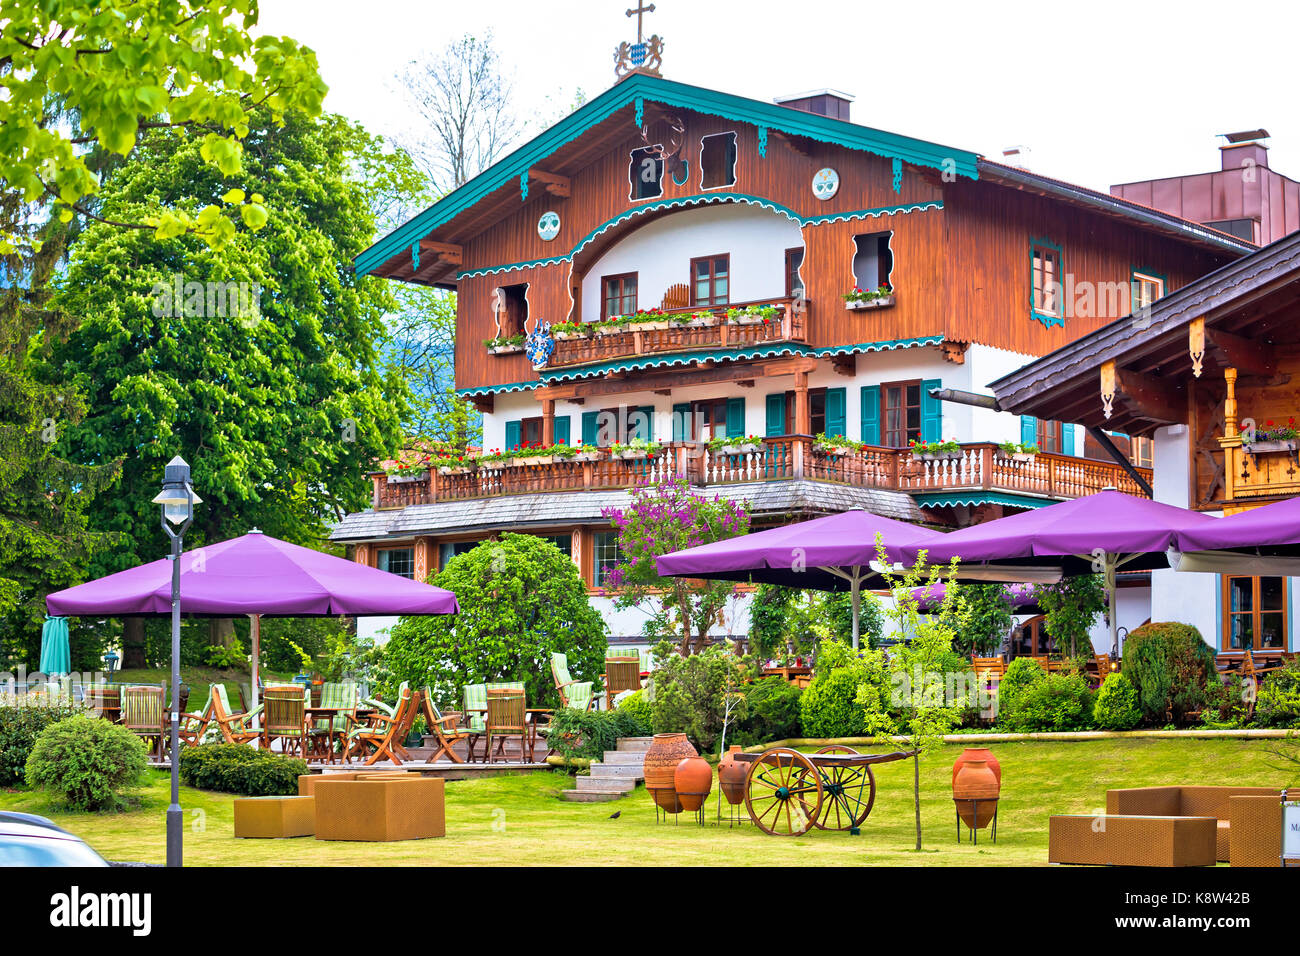 Traditional german architecture of Rottach Egern village on Tegernsee lake, Bavaria region of Germany Stock Photo